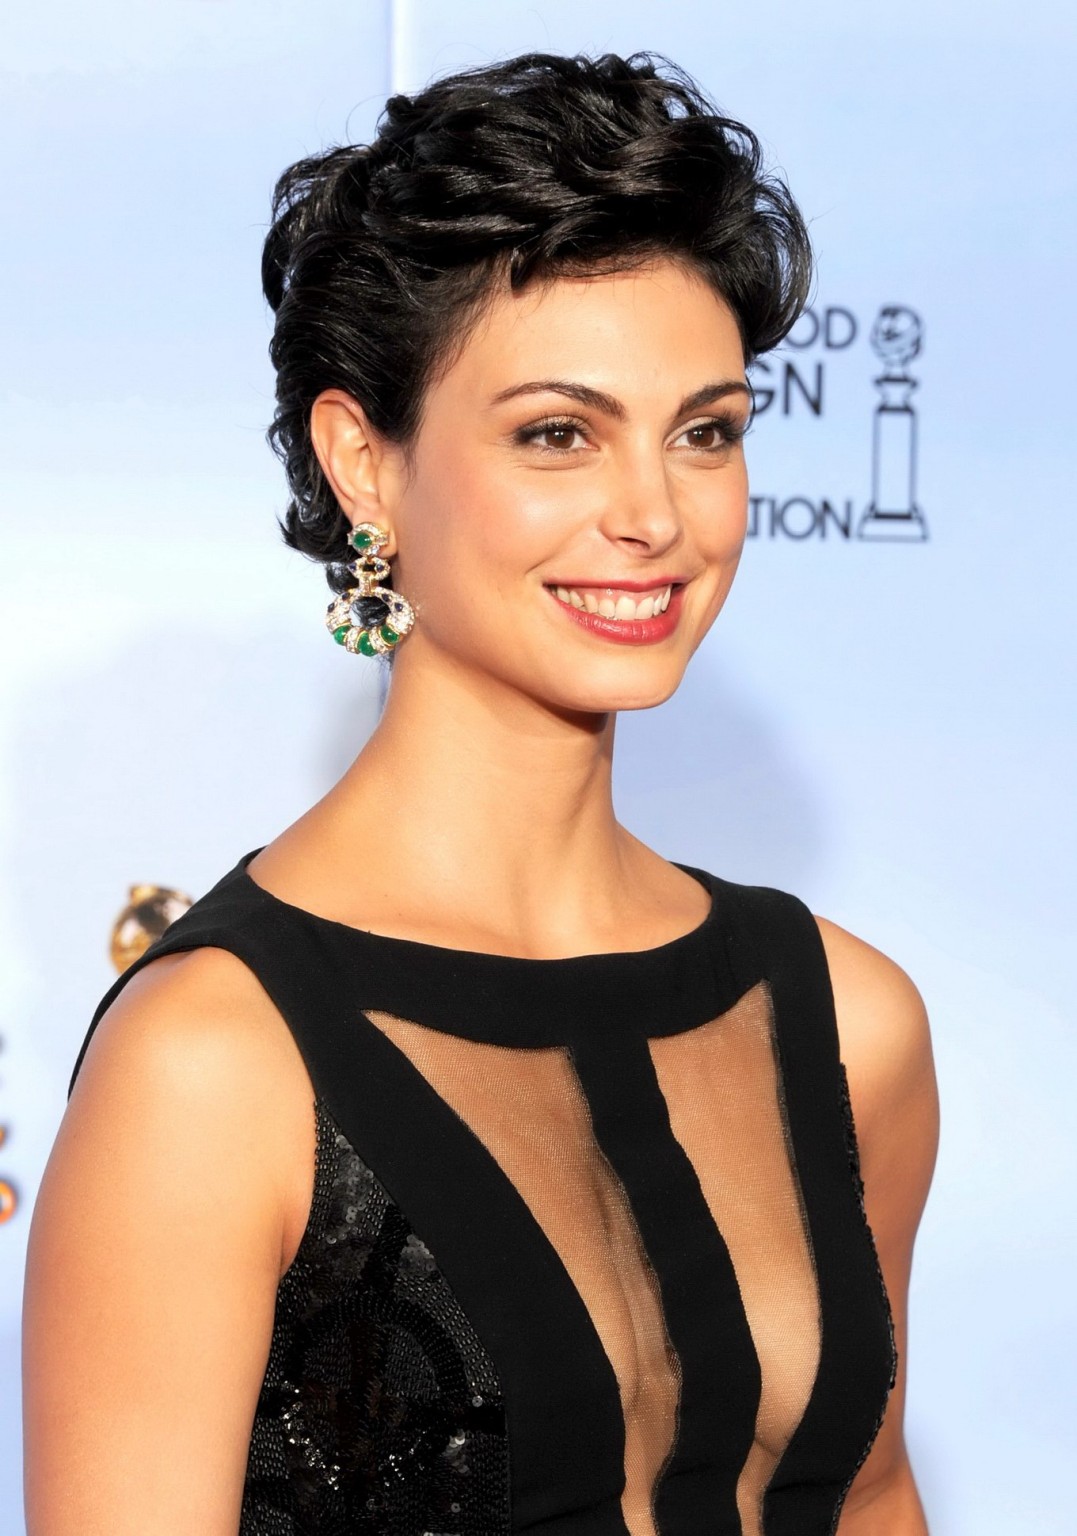 Morena Baccarin braless wearing sexy black dress at the Golden Globes 2012 #75276468